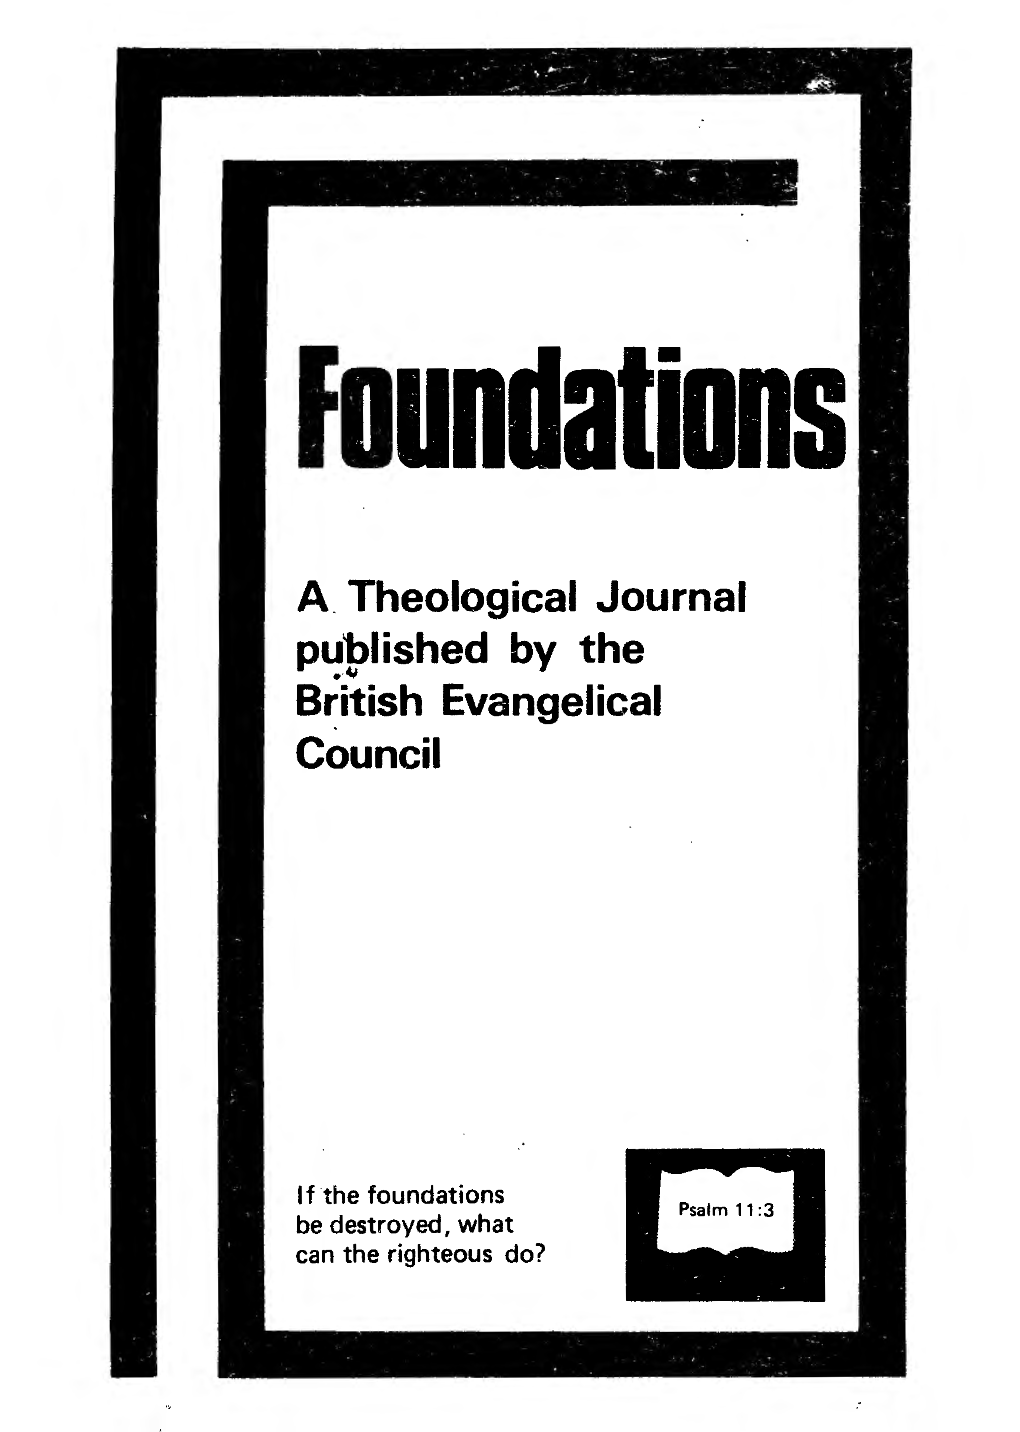 A. Theological Journal Published by the British Evangelical